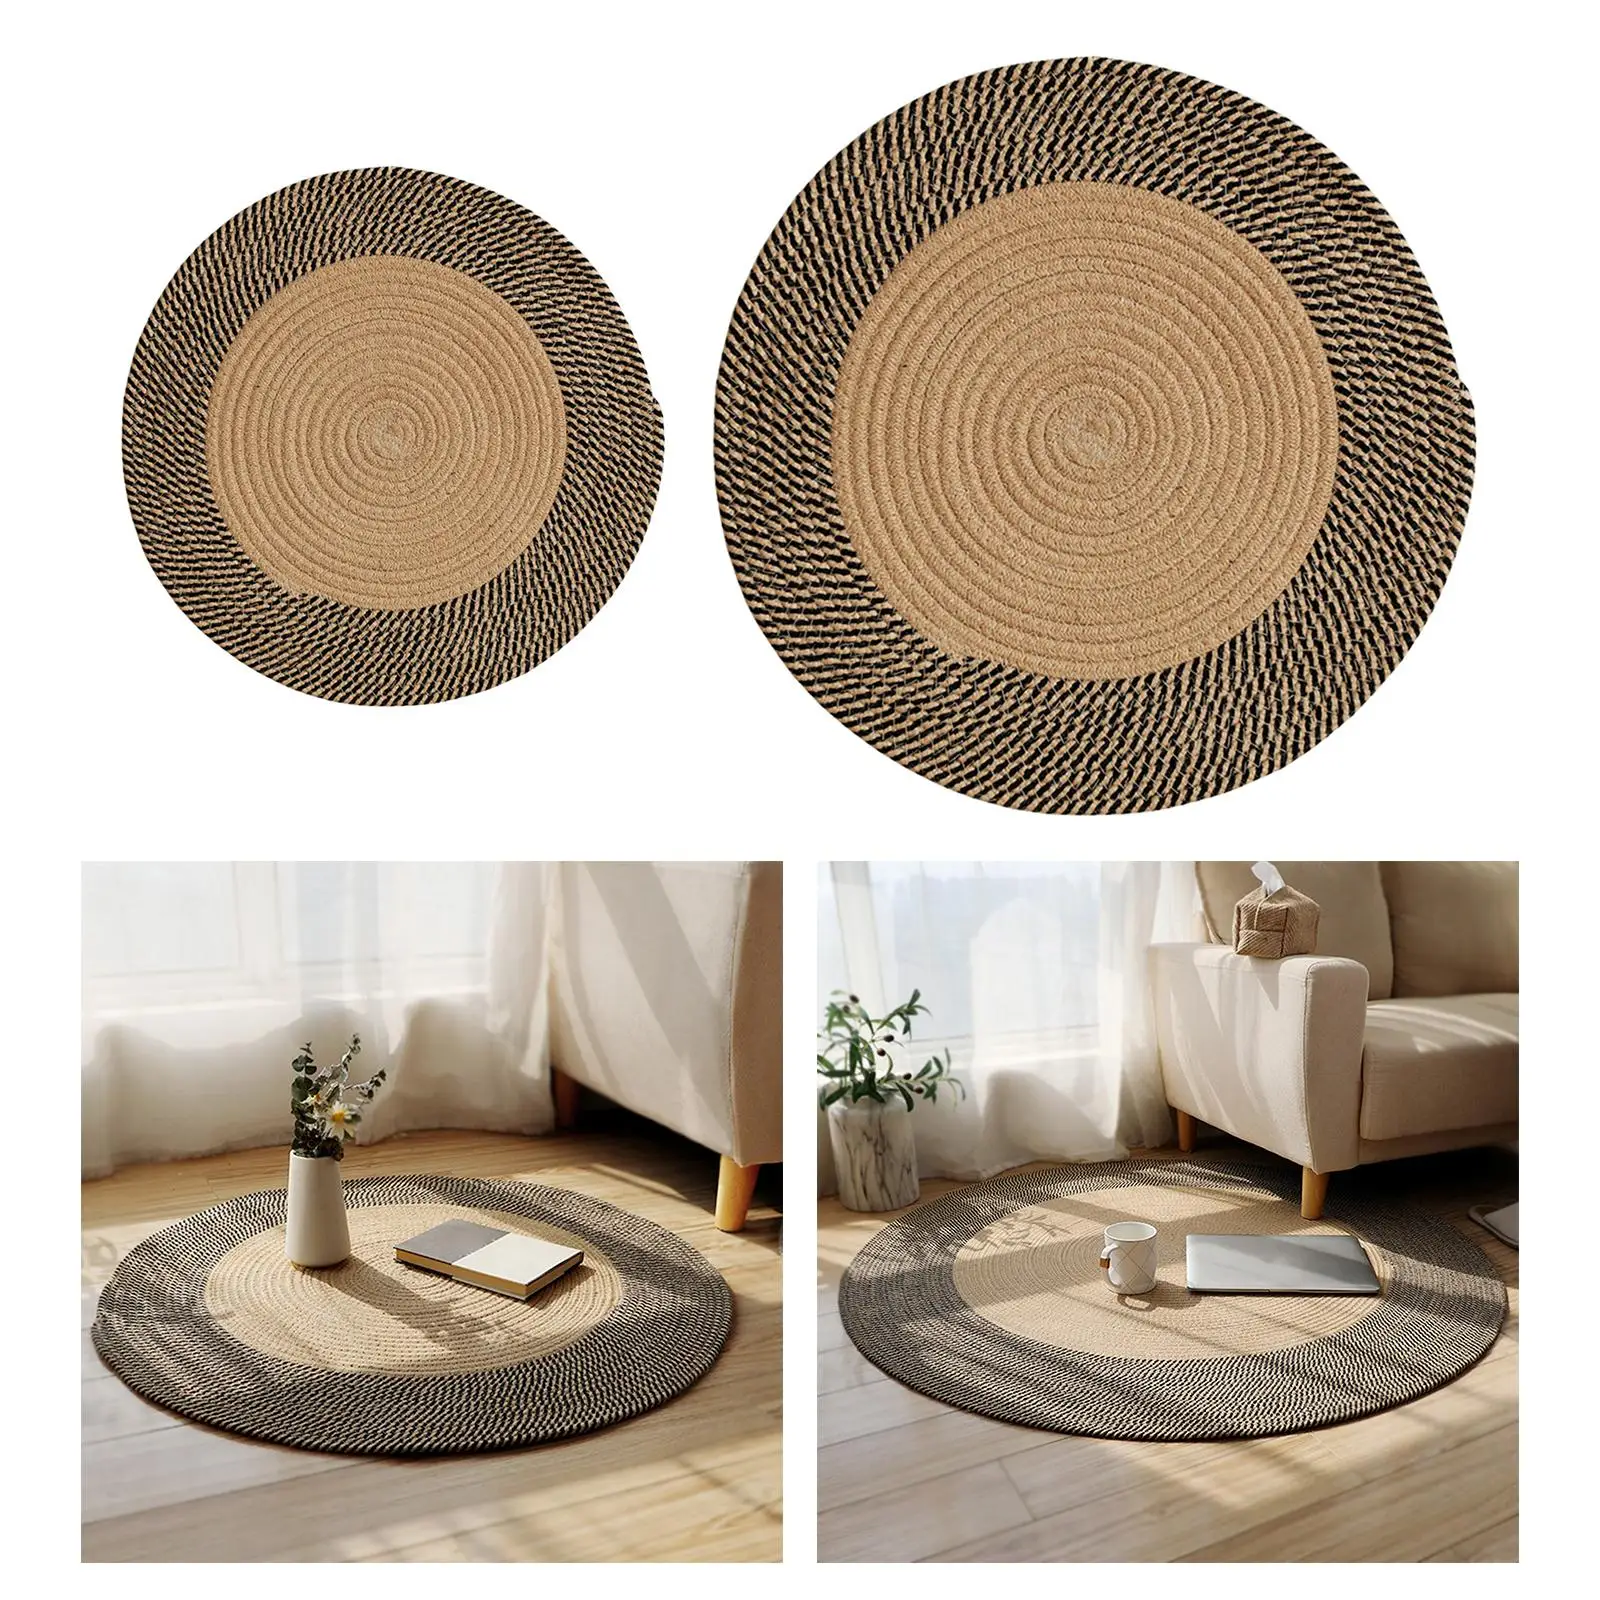 Round Handwoven Jute Braided Rug Reversible Area Rugs for Bedroom Home Decor